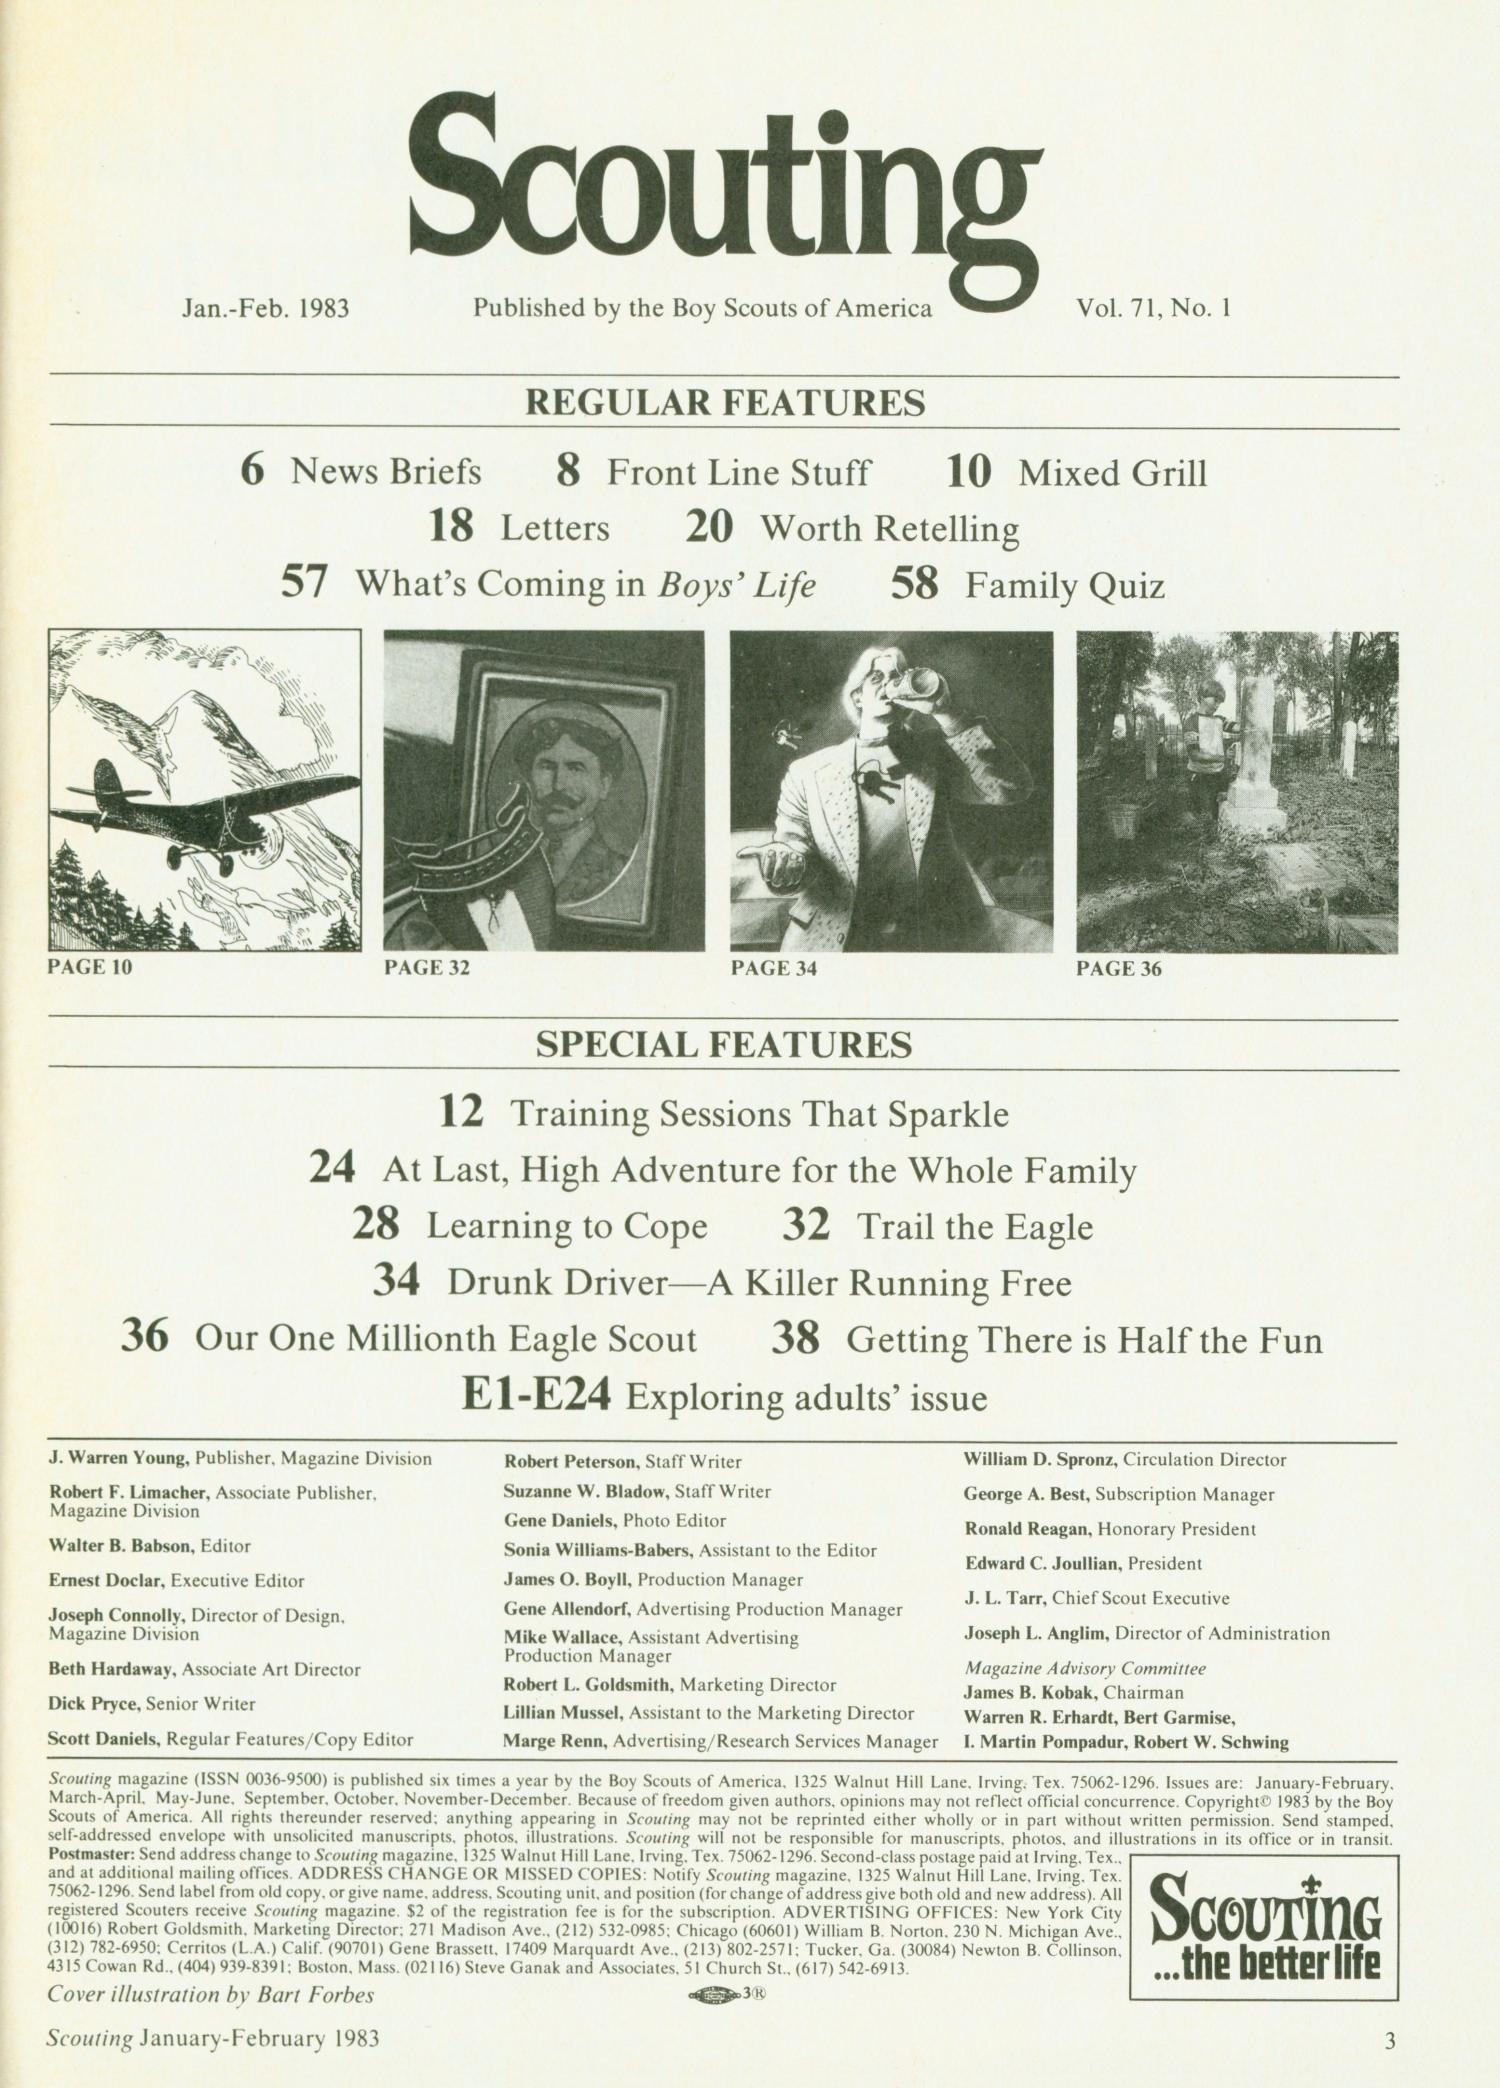 Scouting, Volume 71, Number 1, January-February 1983
                                                
                                                    3
                                                